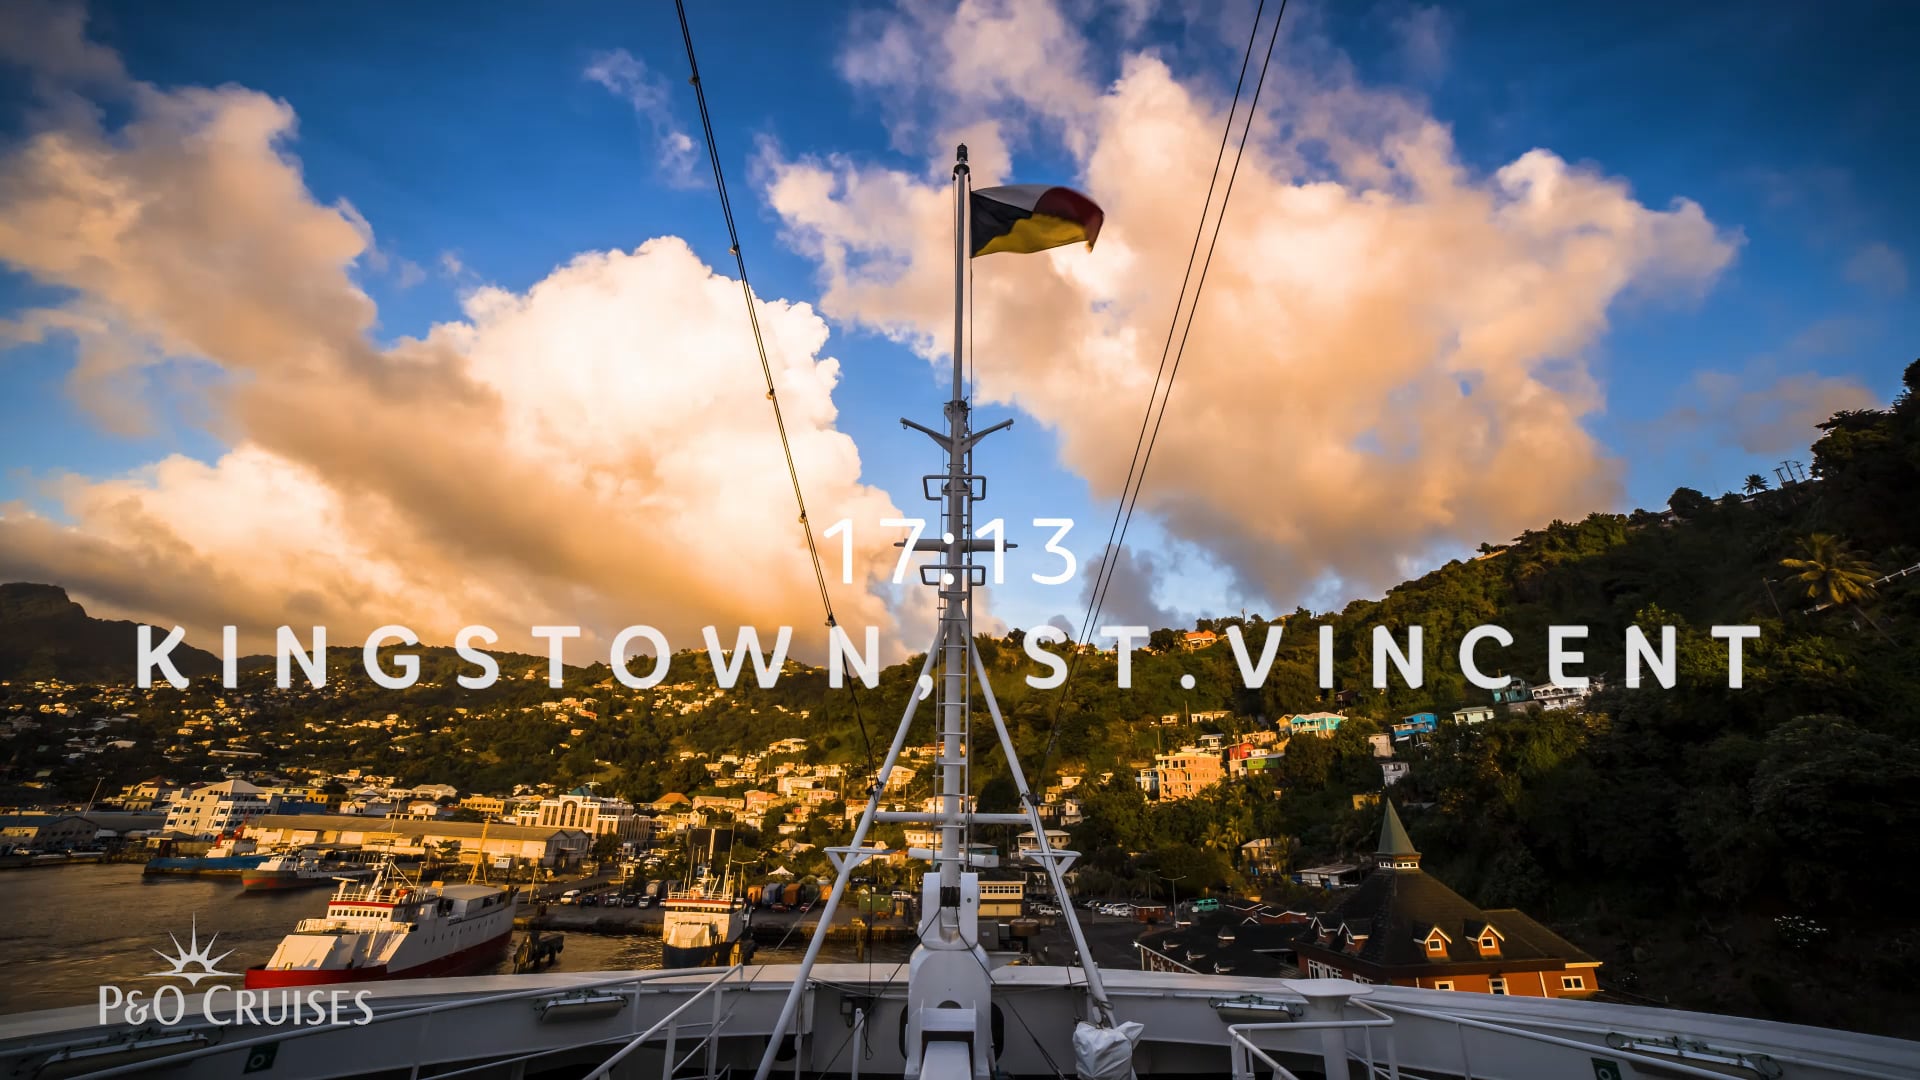 P&O Cruises - Day to Night from St Vincent with Milky Way and Sunrise in St Lucia - Director, Video Editor & Sound Design